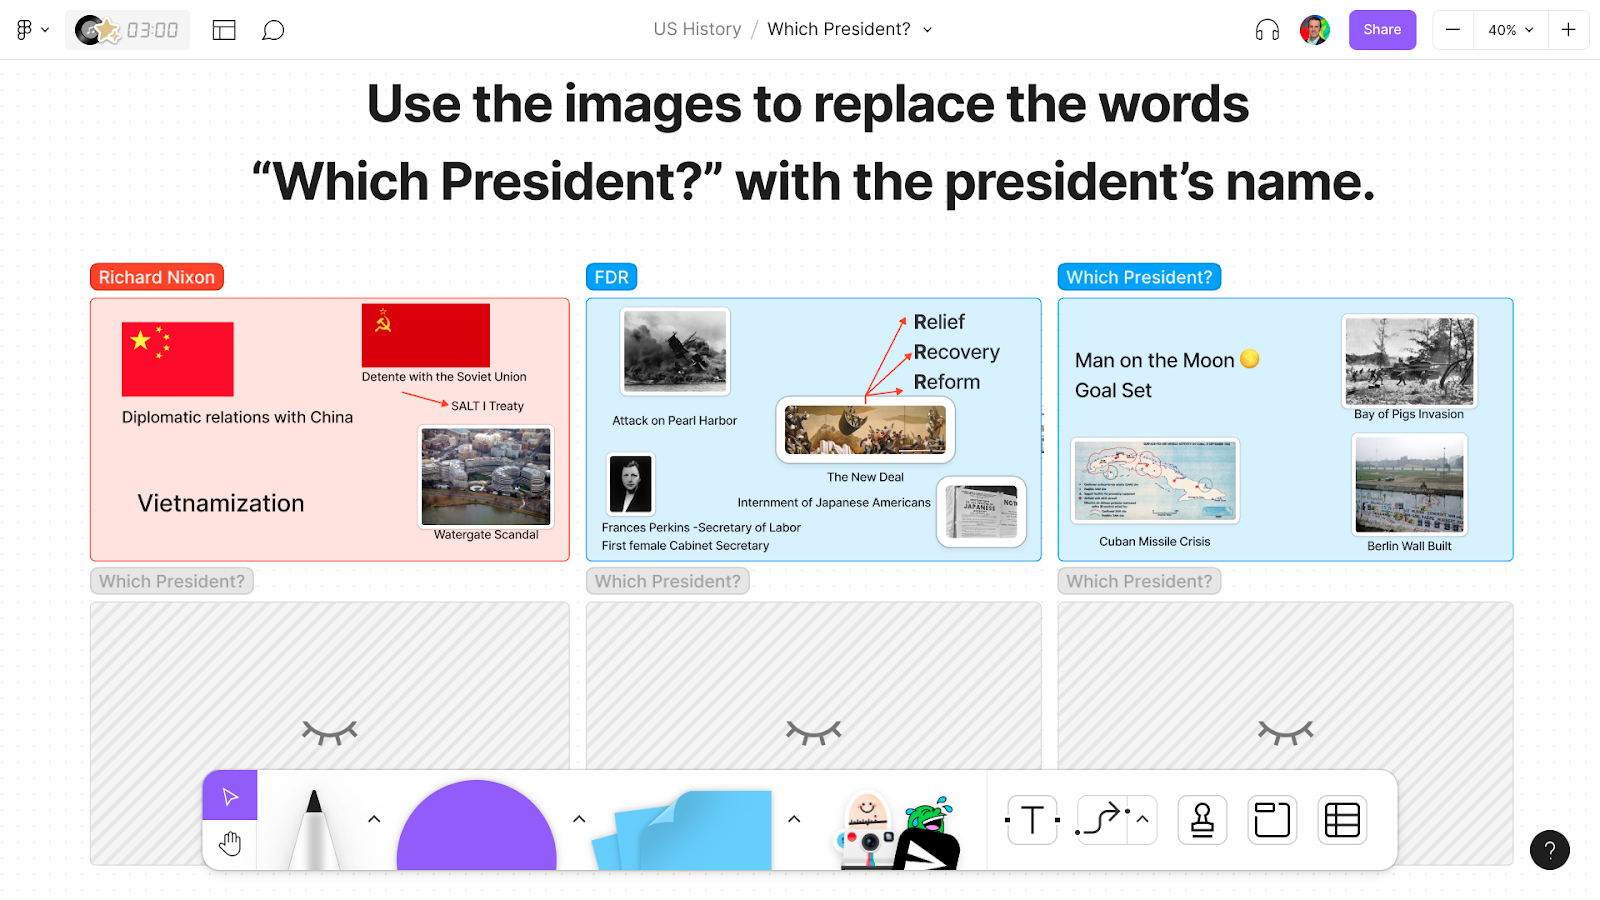 A FigJam with the prompt, “Use the images to replace the words “Which President?” with the president’s name.” Sections labeled “Richard Nixon” and “FDR” are visible. There is a section labeled “Which President?” with content including “Man on the Moon Goal Set,” “Bay of Pigs Invasion,” Cuban Missile Crisis,” and “Berlin Wall Built.” There are three hidden sections.